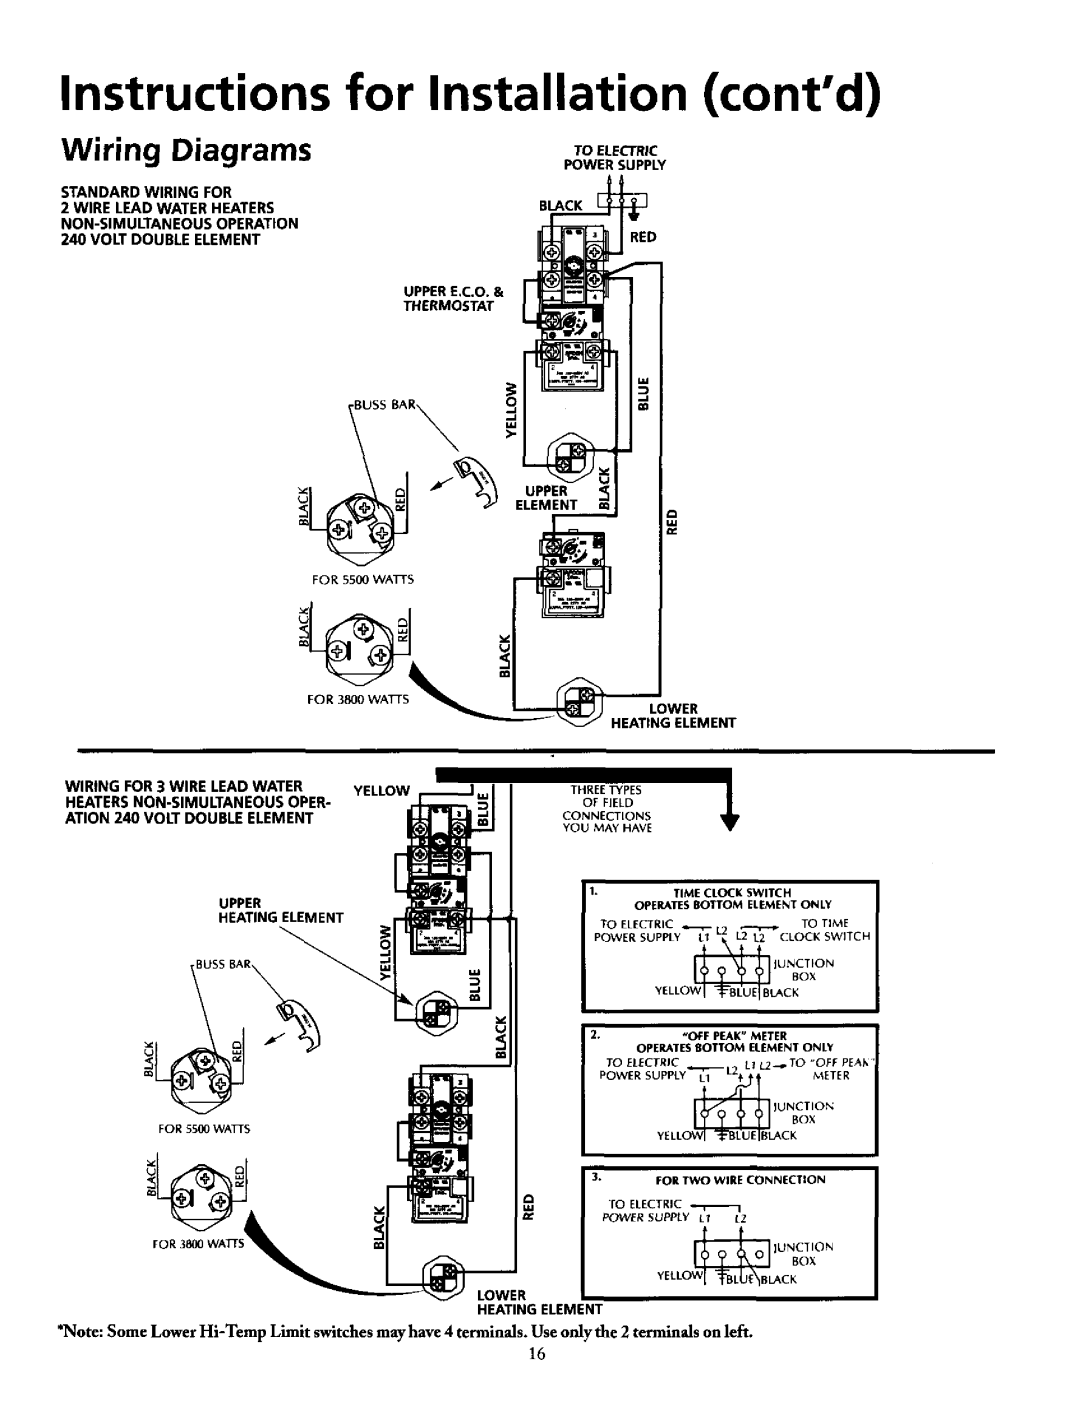 Maytag HE3950T, HE3940T Wiring Diagrams, Instructions for Installation contd, Element, ToELE R,C, Lower, Heatingelement 